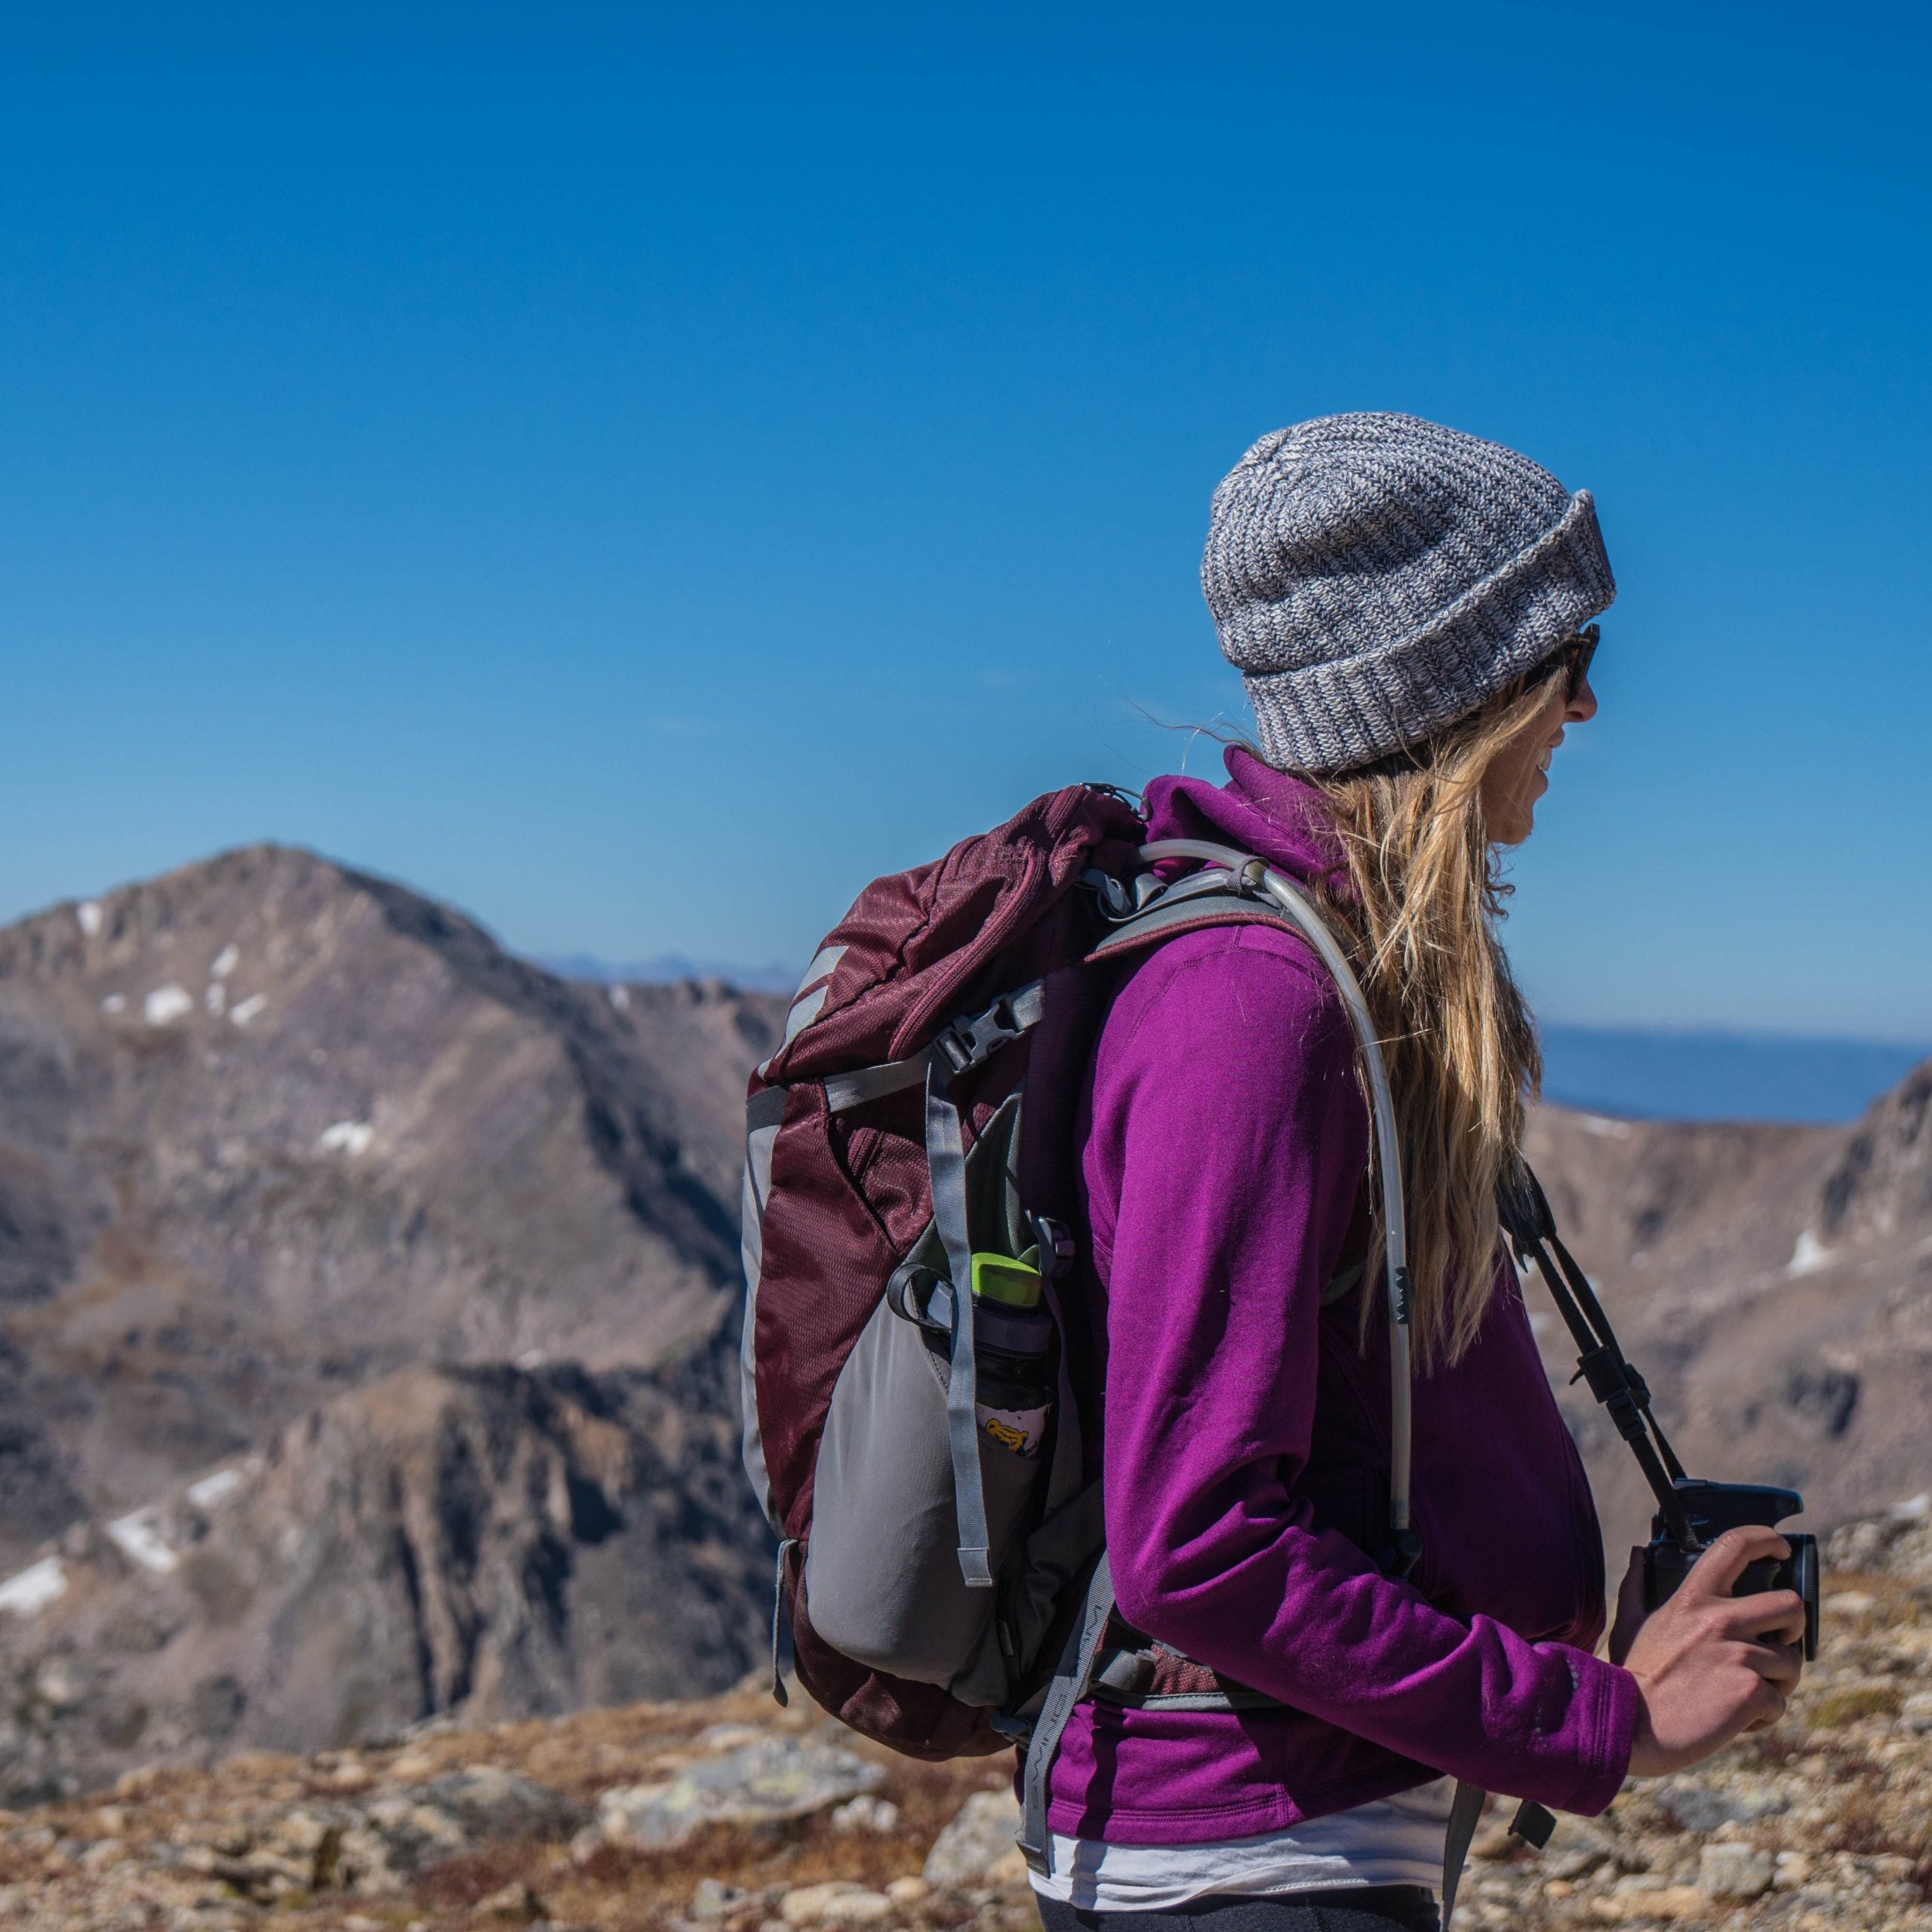 Outdoor Clothing Brands All You Need to Know in 2020